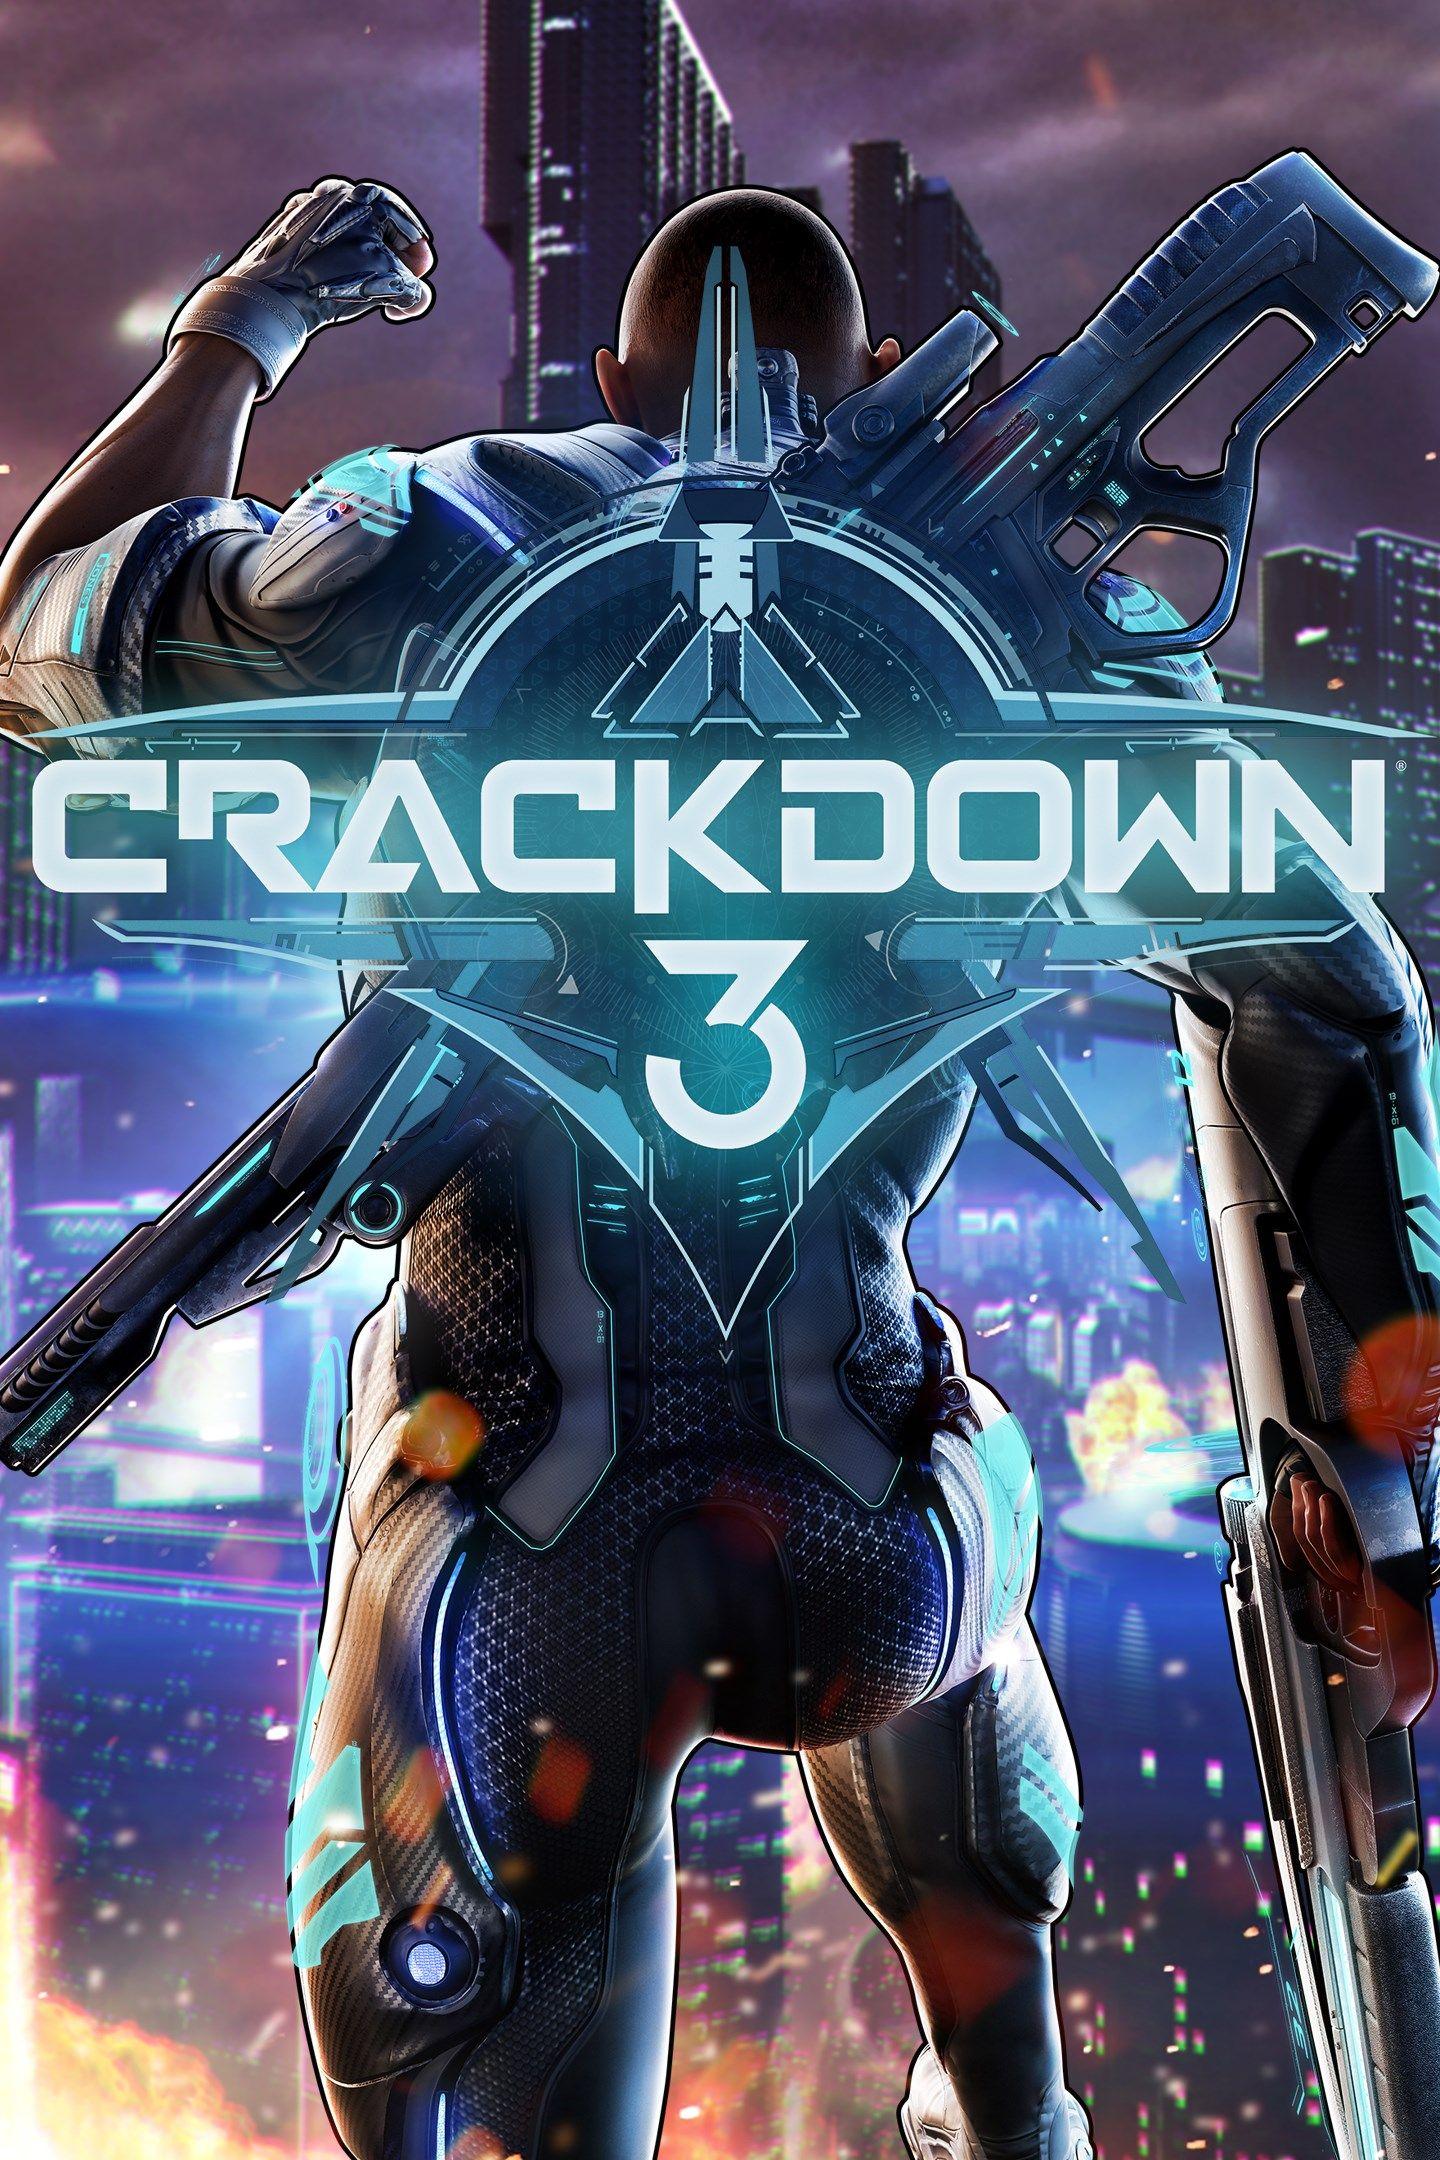 Crackdown 3 For Xbox One: Pre Install With Xbox Game Pass